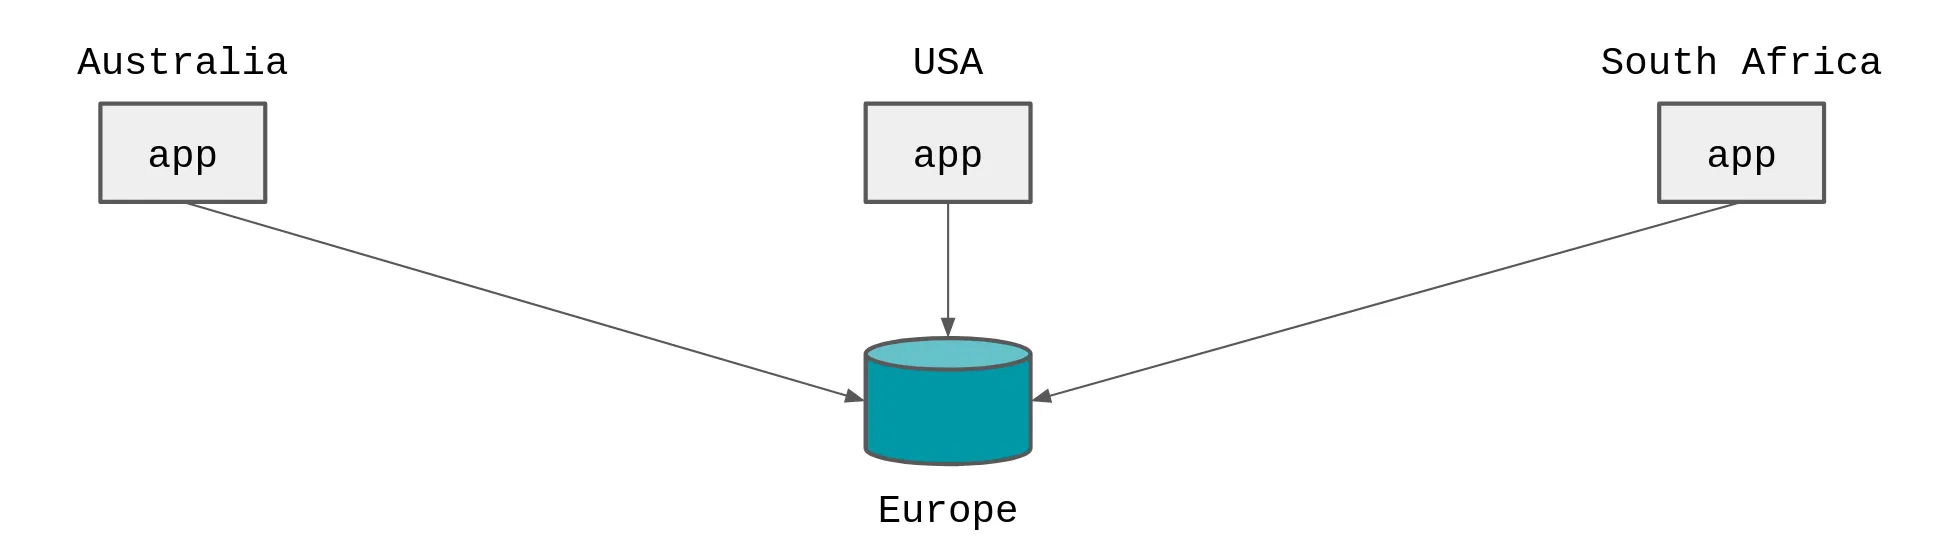 "Edge apps with centralised database"